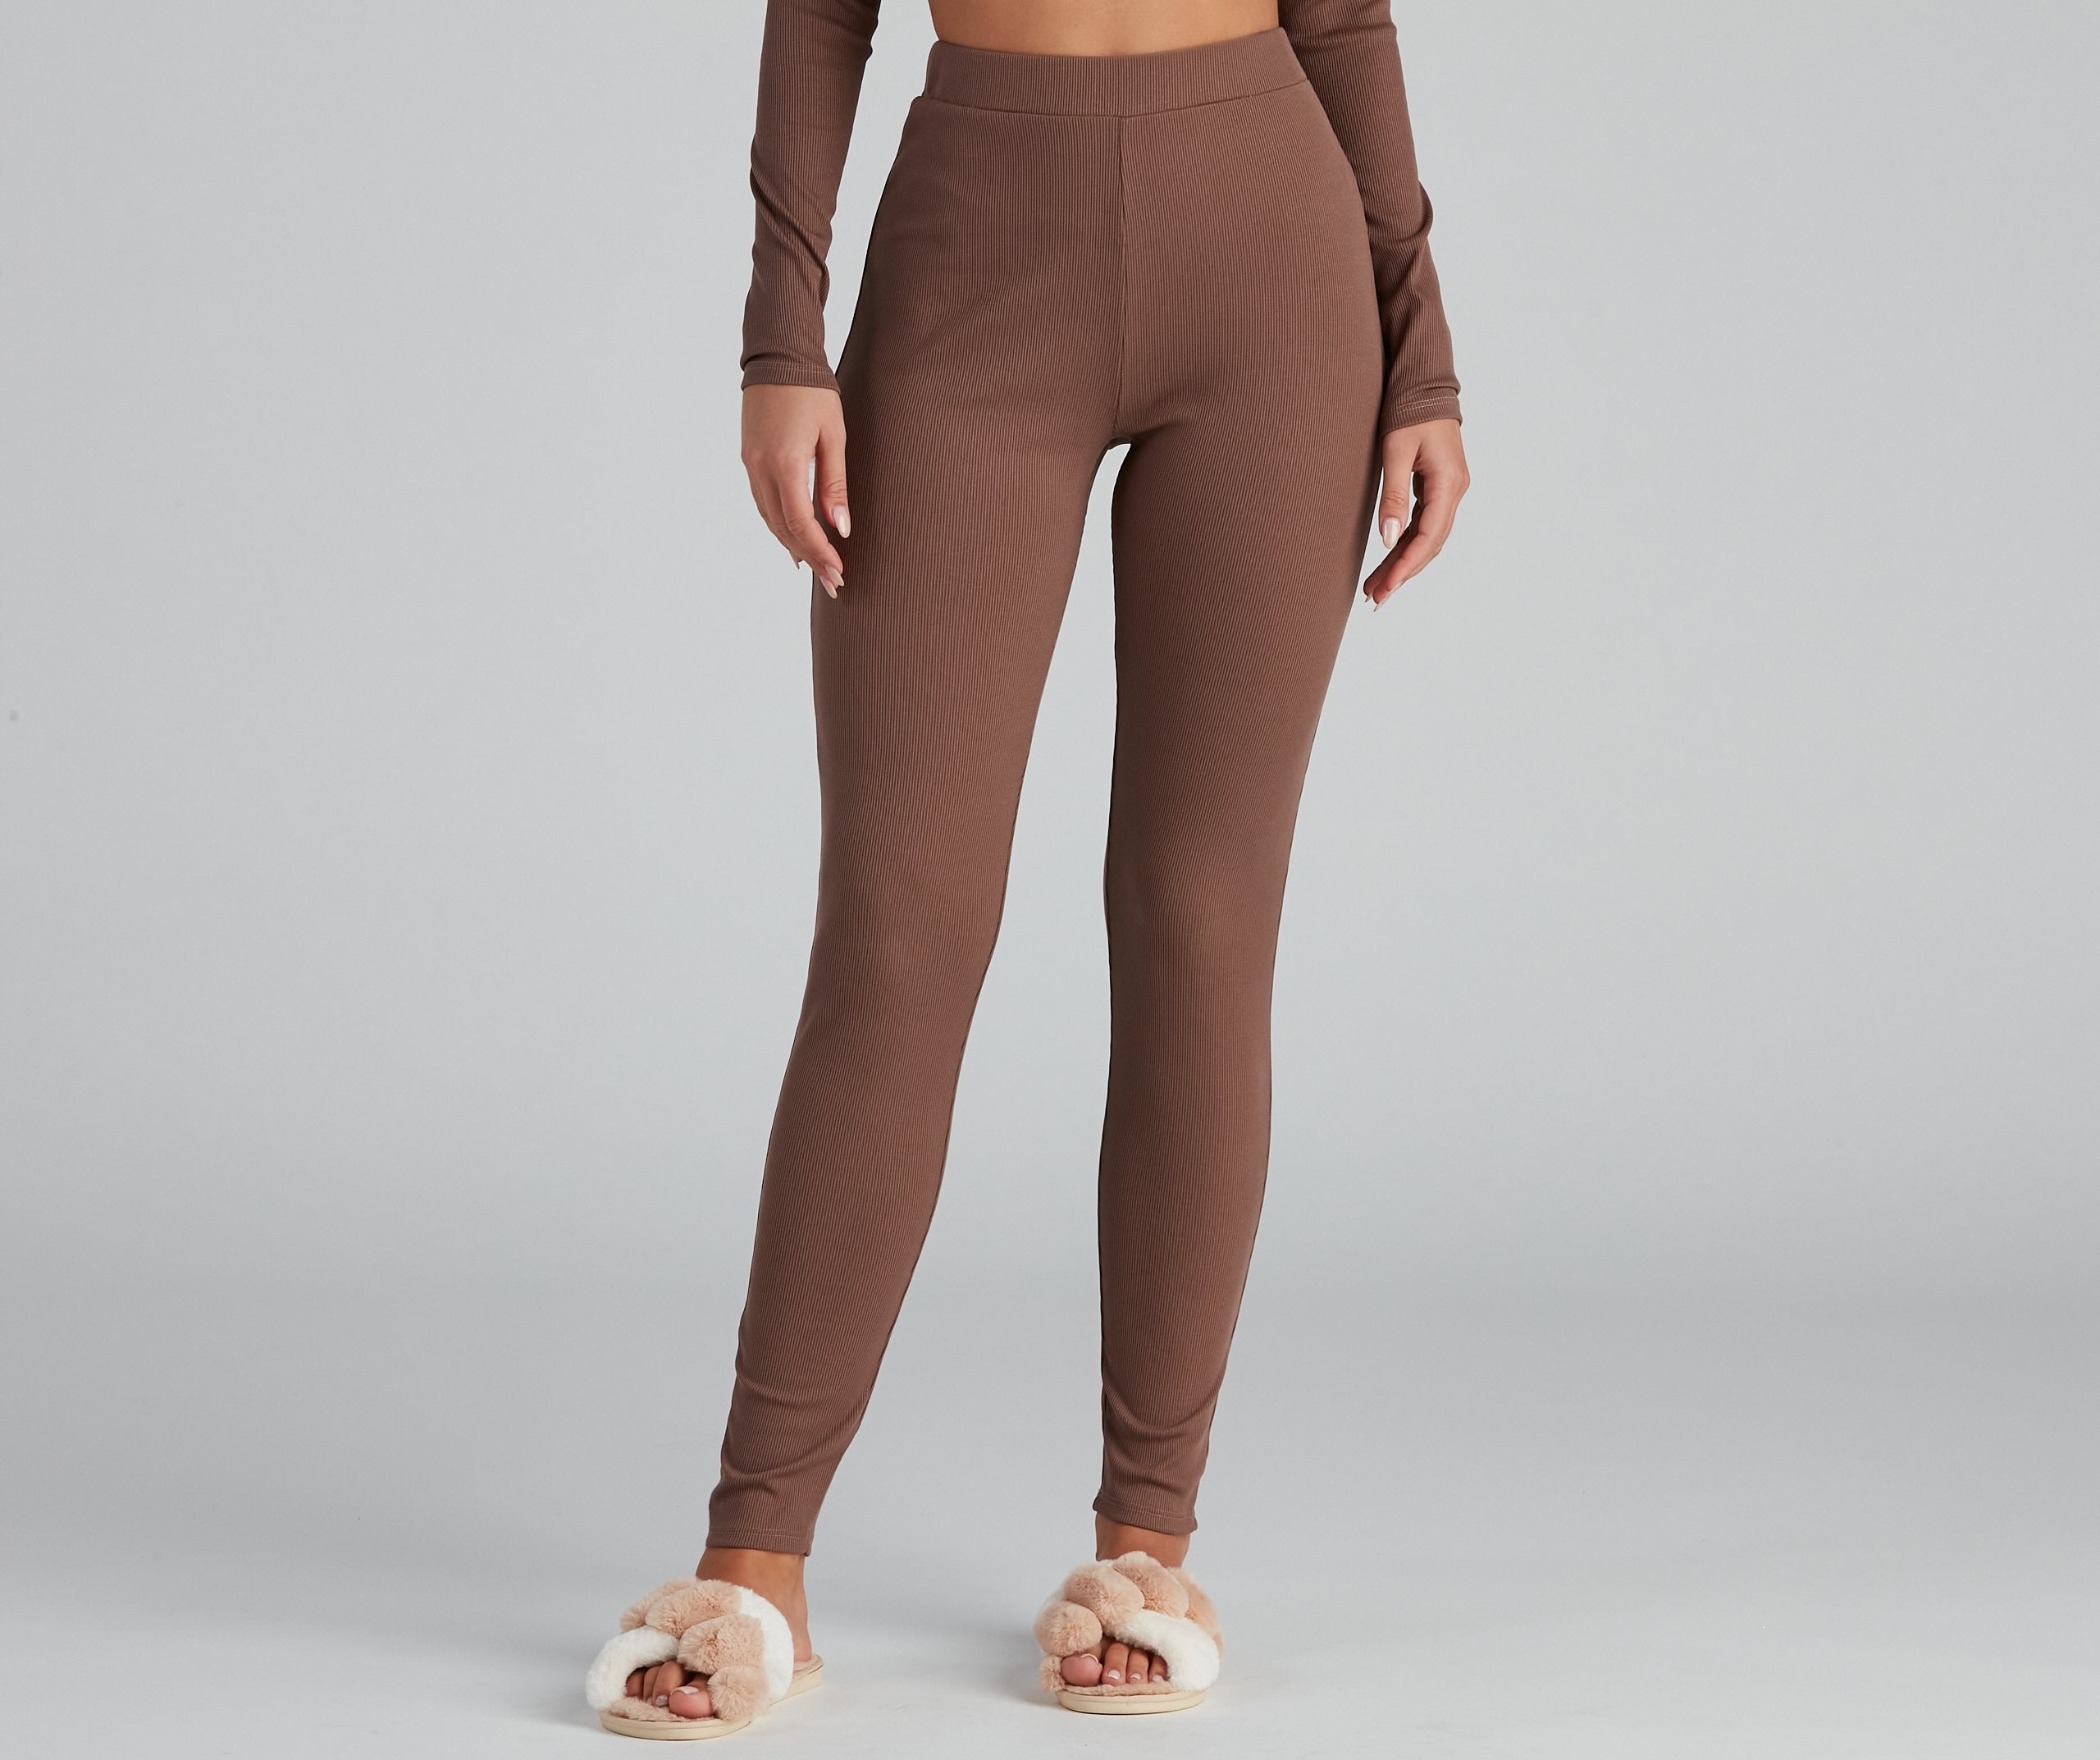 Lazy Day Vibes Pajama Leggings - Lady Occasions